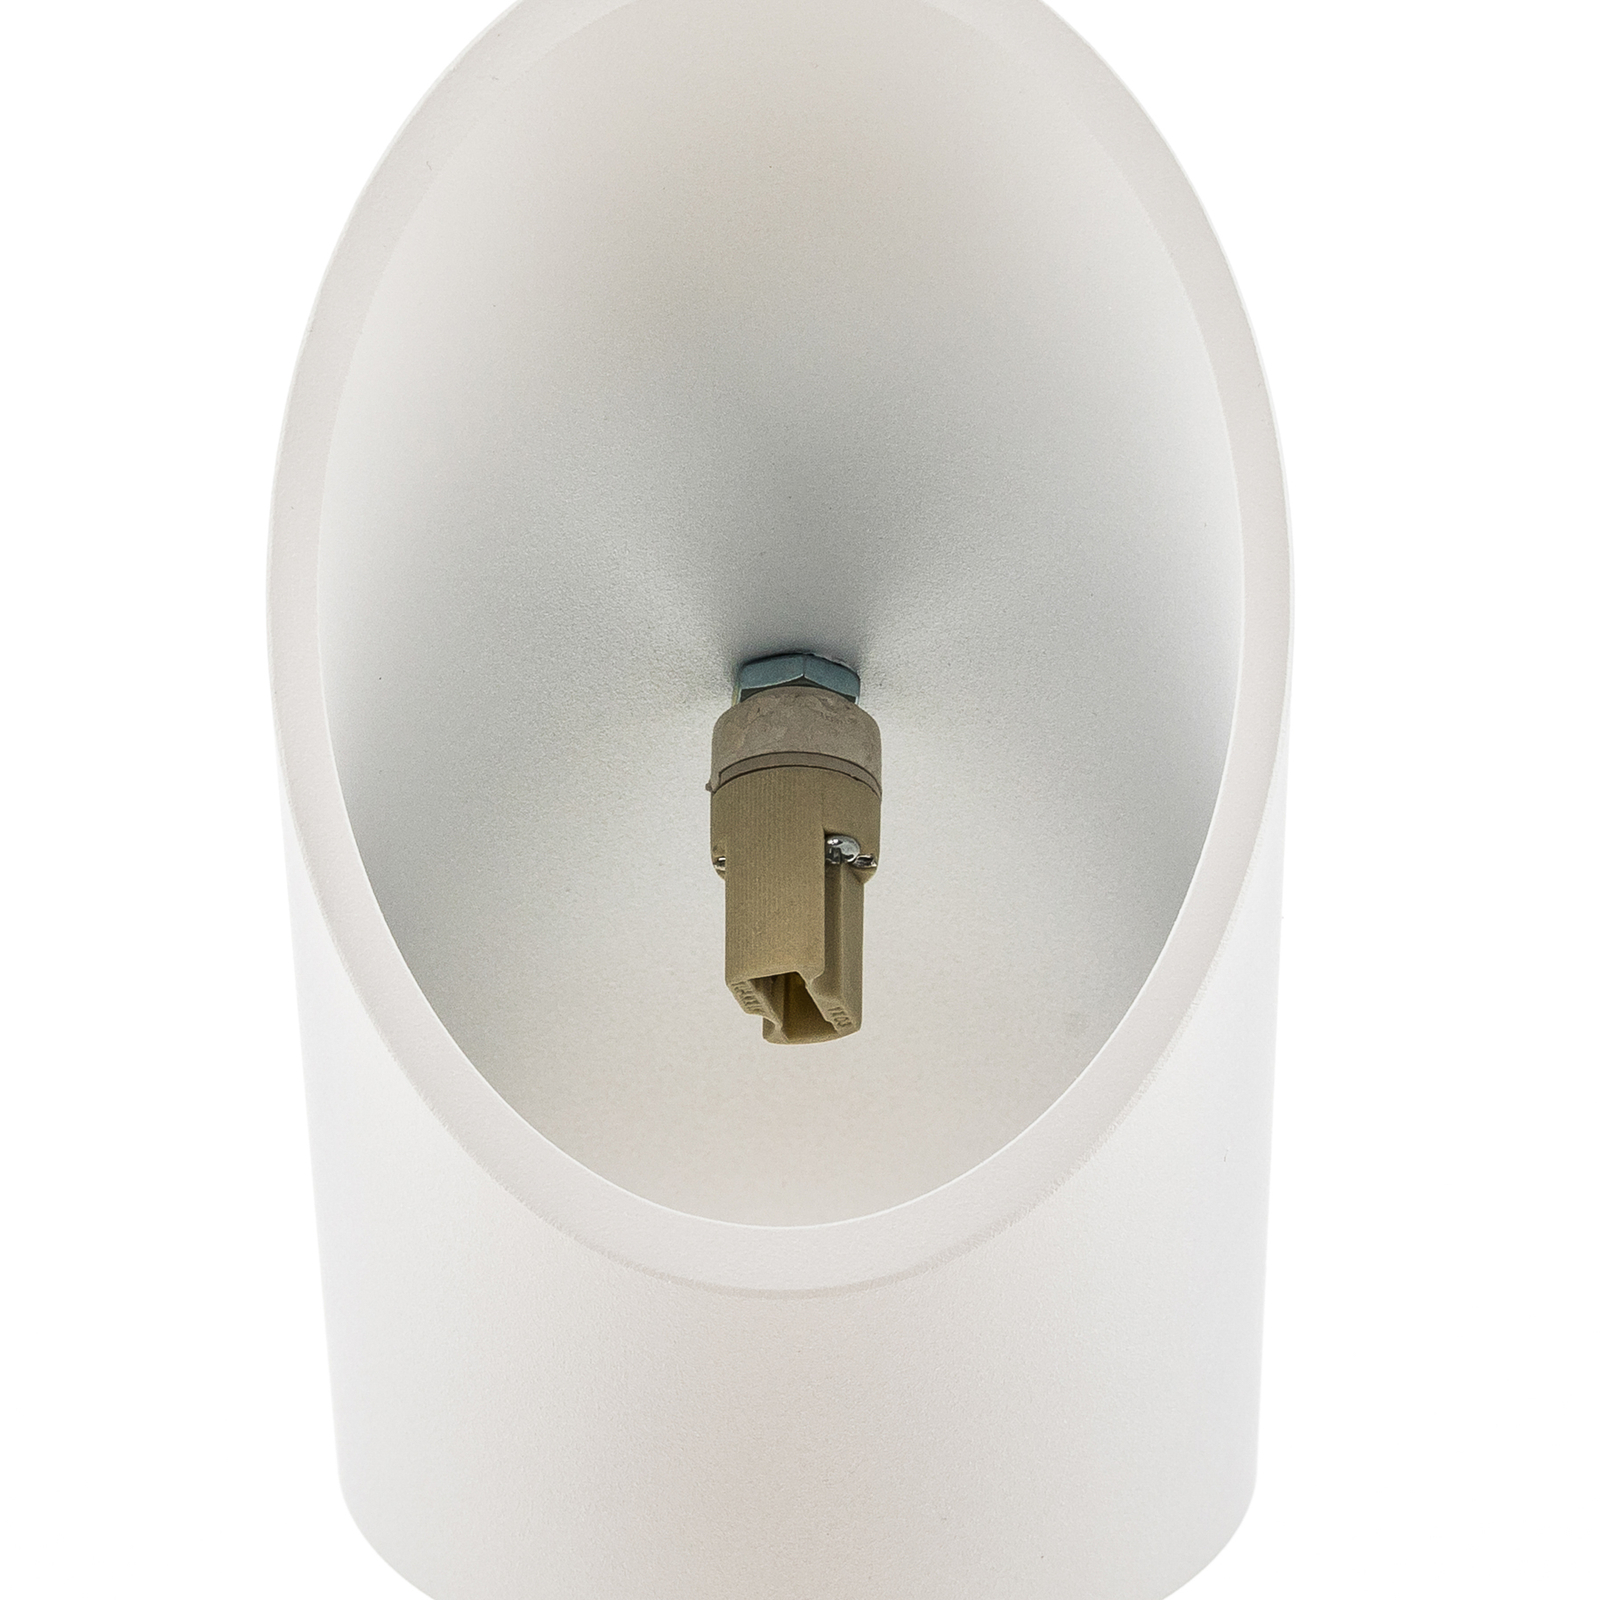 Saturn 30 wall light, up/down, white